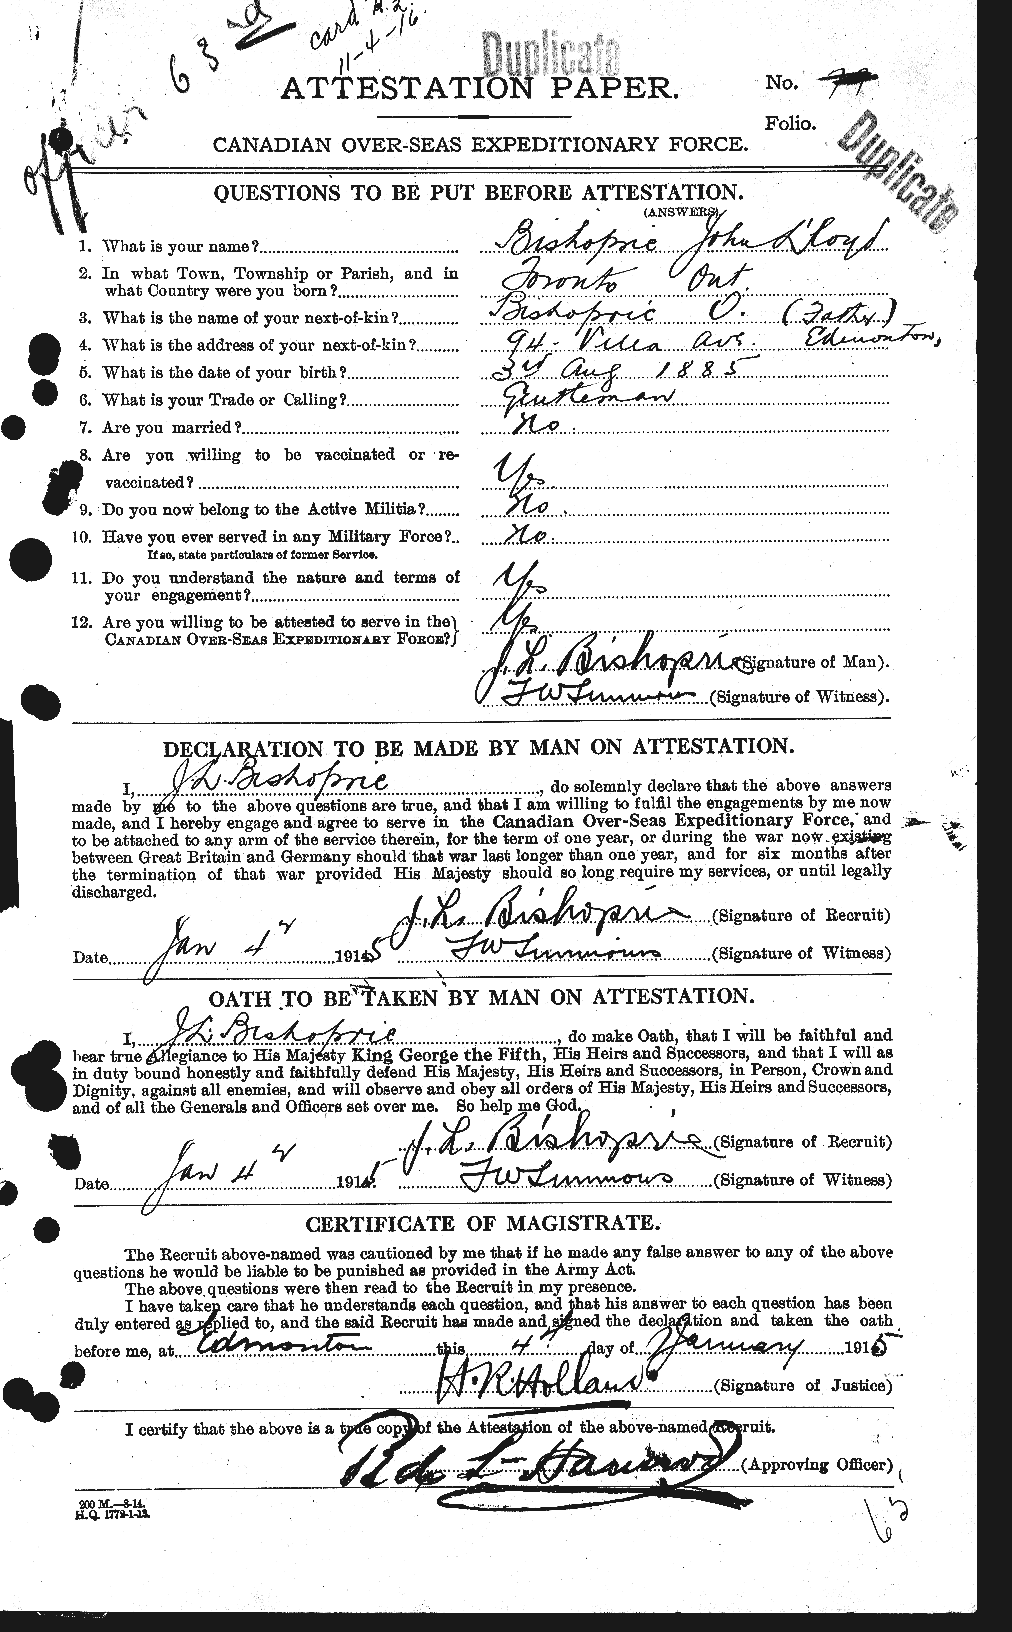 Personnel Records of the First World War - CEF 245661a